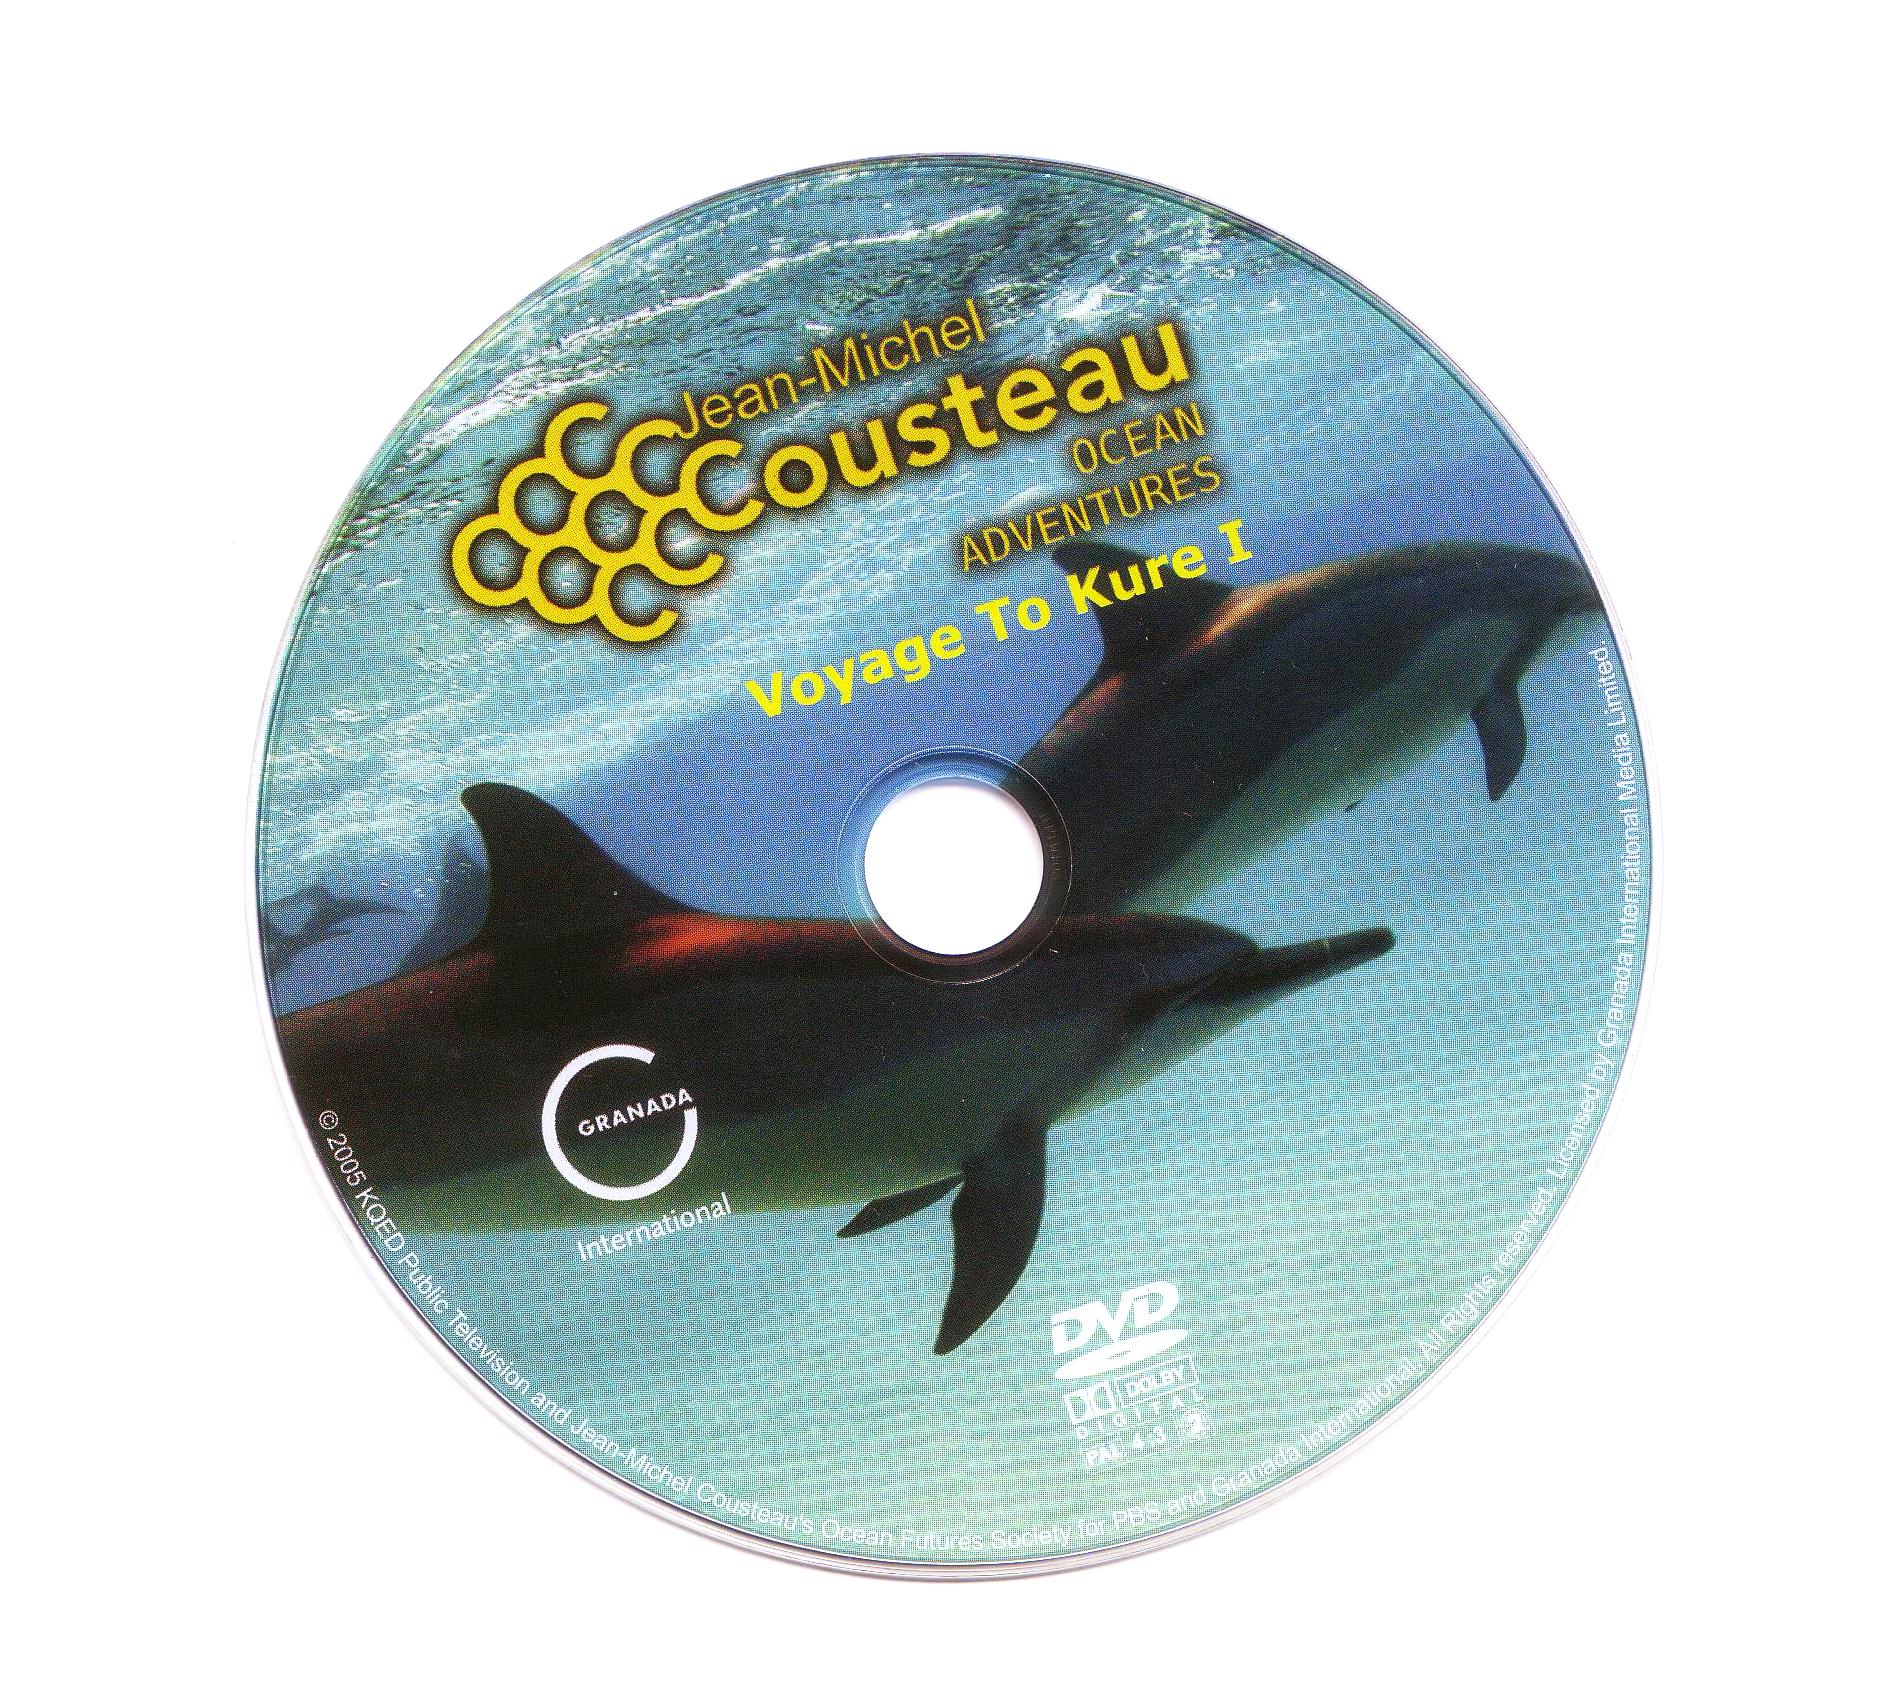 Click to view full size image -  DVD Cover - O - DVD - OCEANSKE PUSTOLOVINE - CD - DVD - OCEANSKE PUSTOLOVINE - CD.jpg